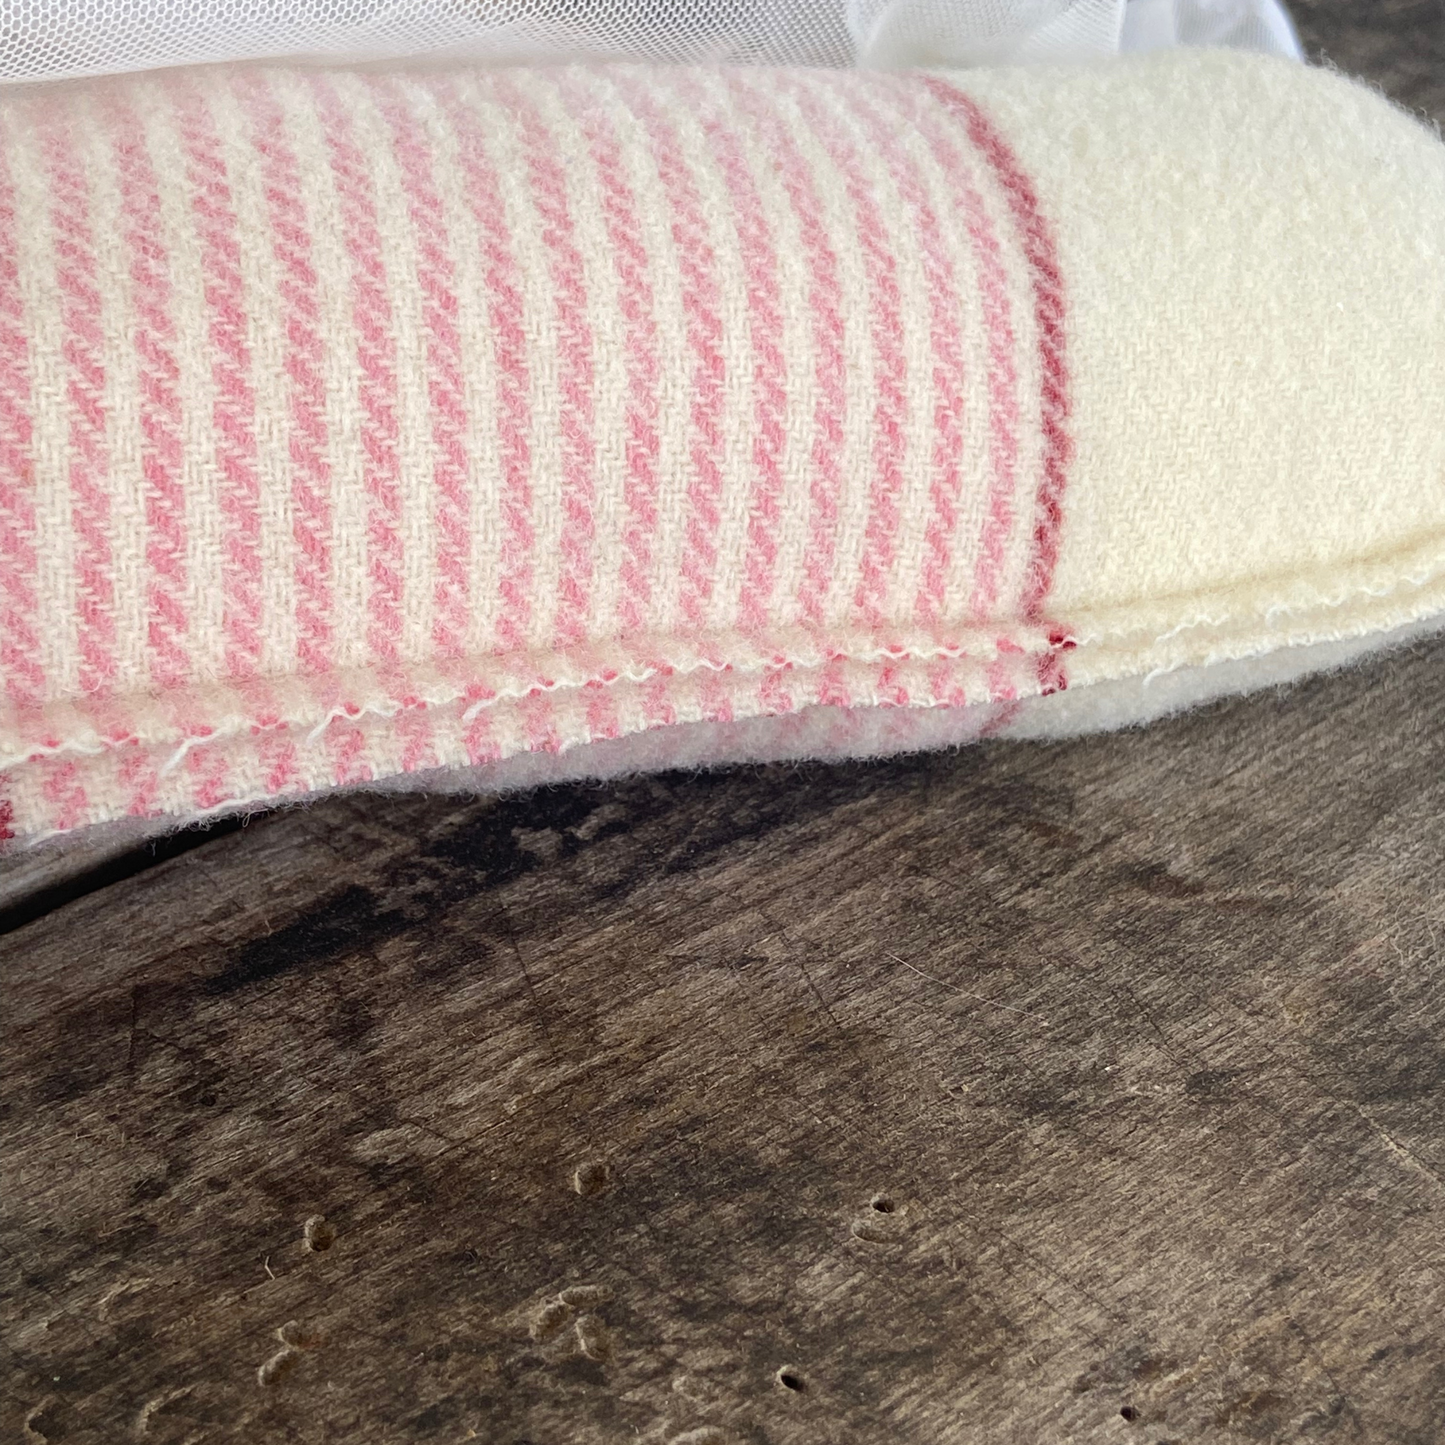 Large Pink Candy Cane Christmas Pillow from Pink Striped Vintage Wool Blanket-16 inch